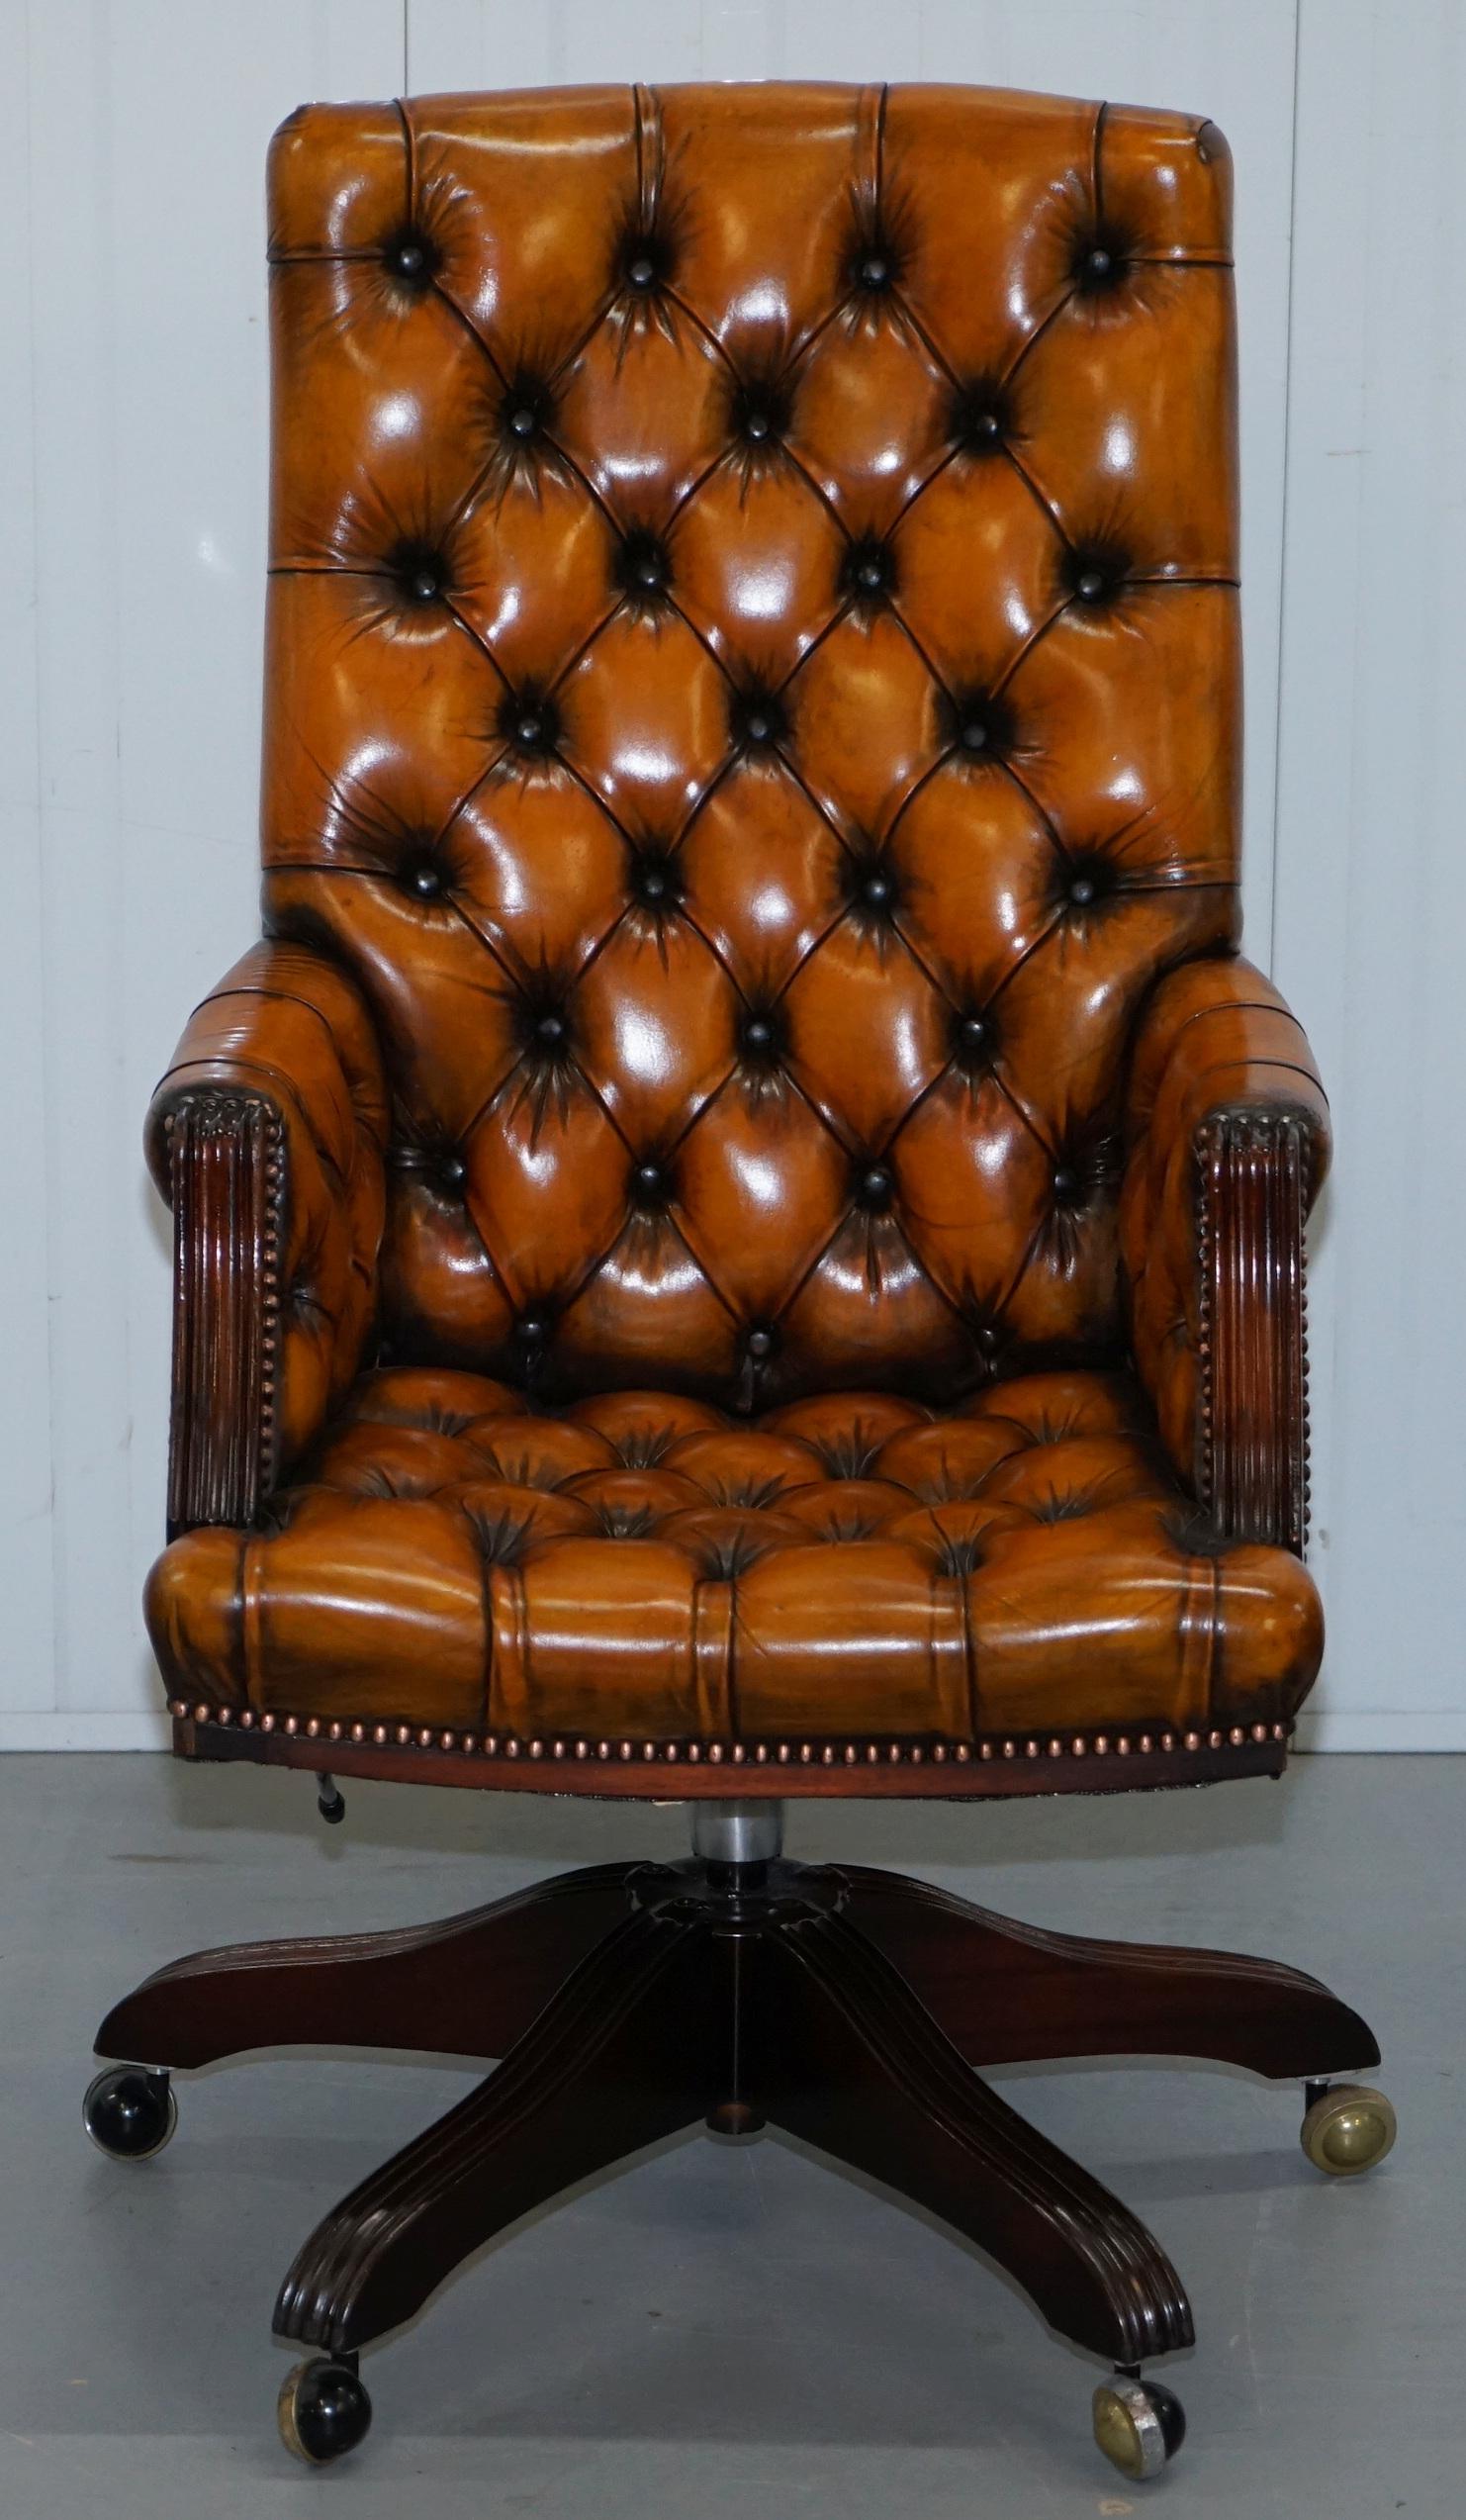 We are delighted to offer for sale this lovely original Wade upholstery fully restored Chesterfield aged cigar brown leather captain’s office directors chairs

This is pretty much the most comfortable office captain’s chair on the market today,